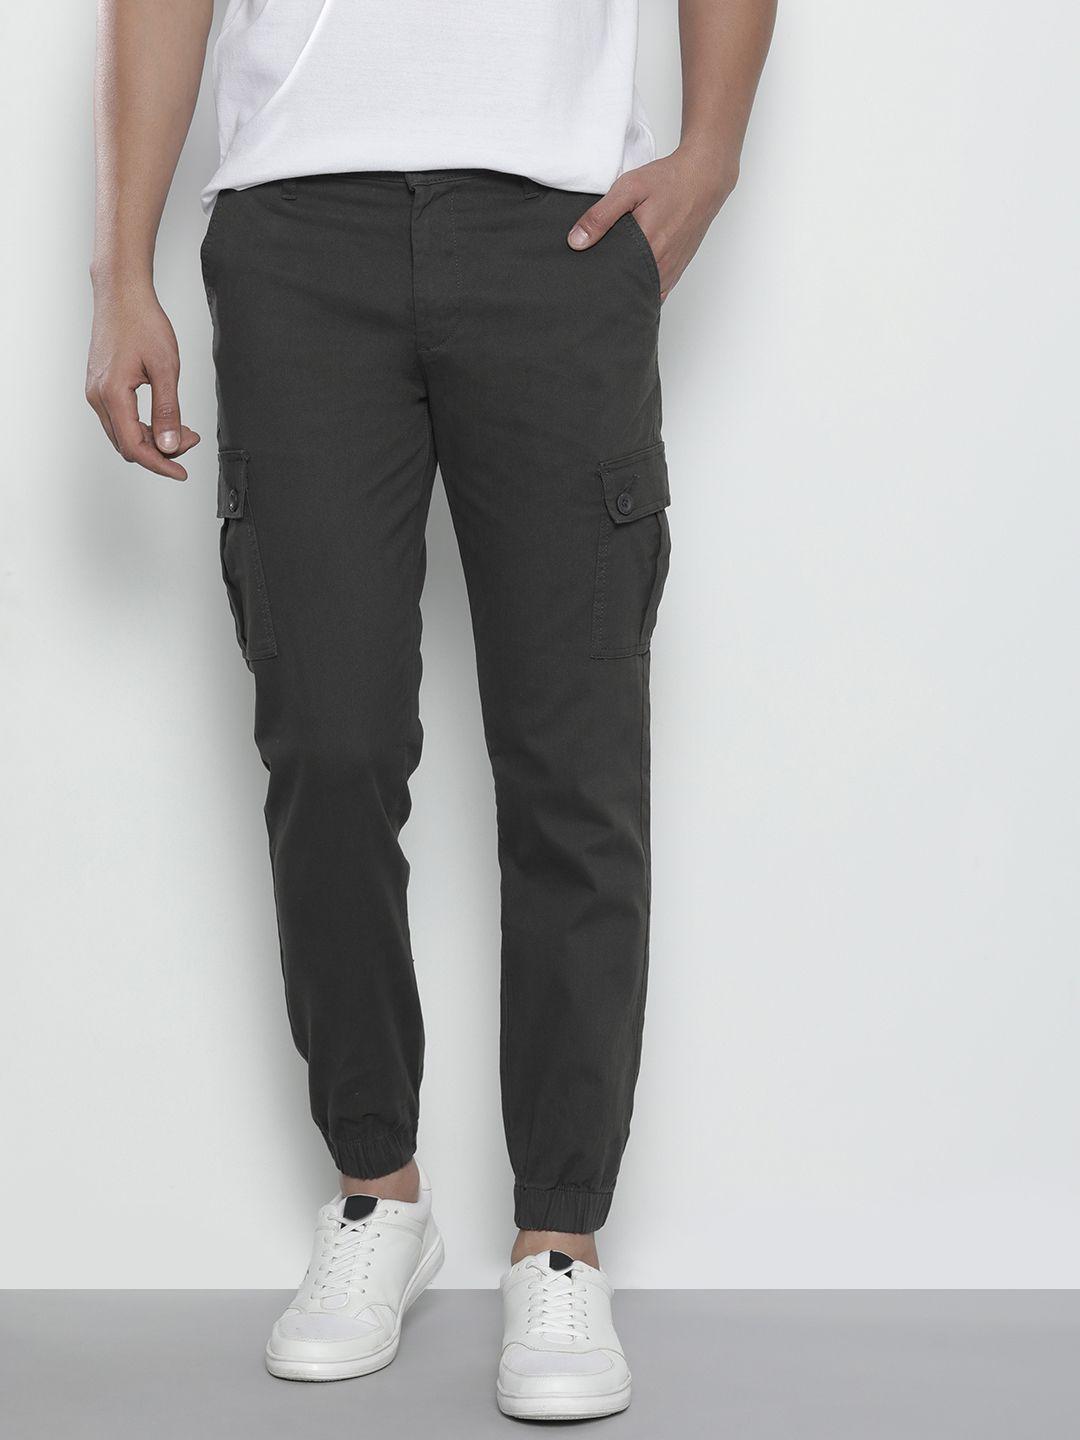 the-indian-garage-co-men-charcoal-grey-slim-fit-cargos-trousers